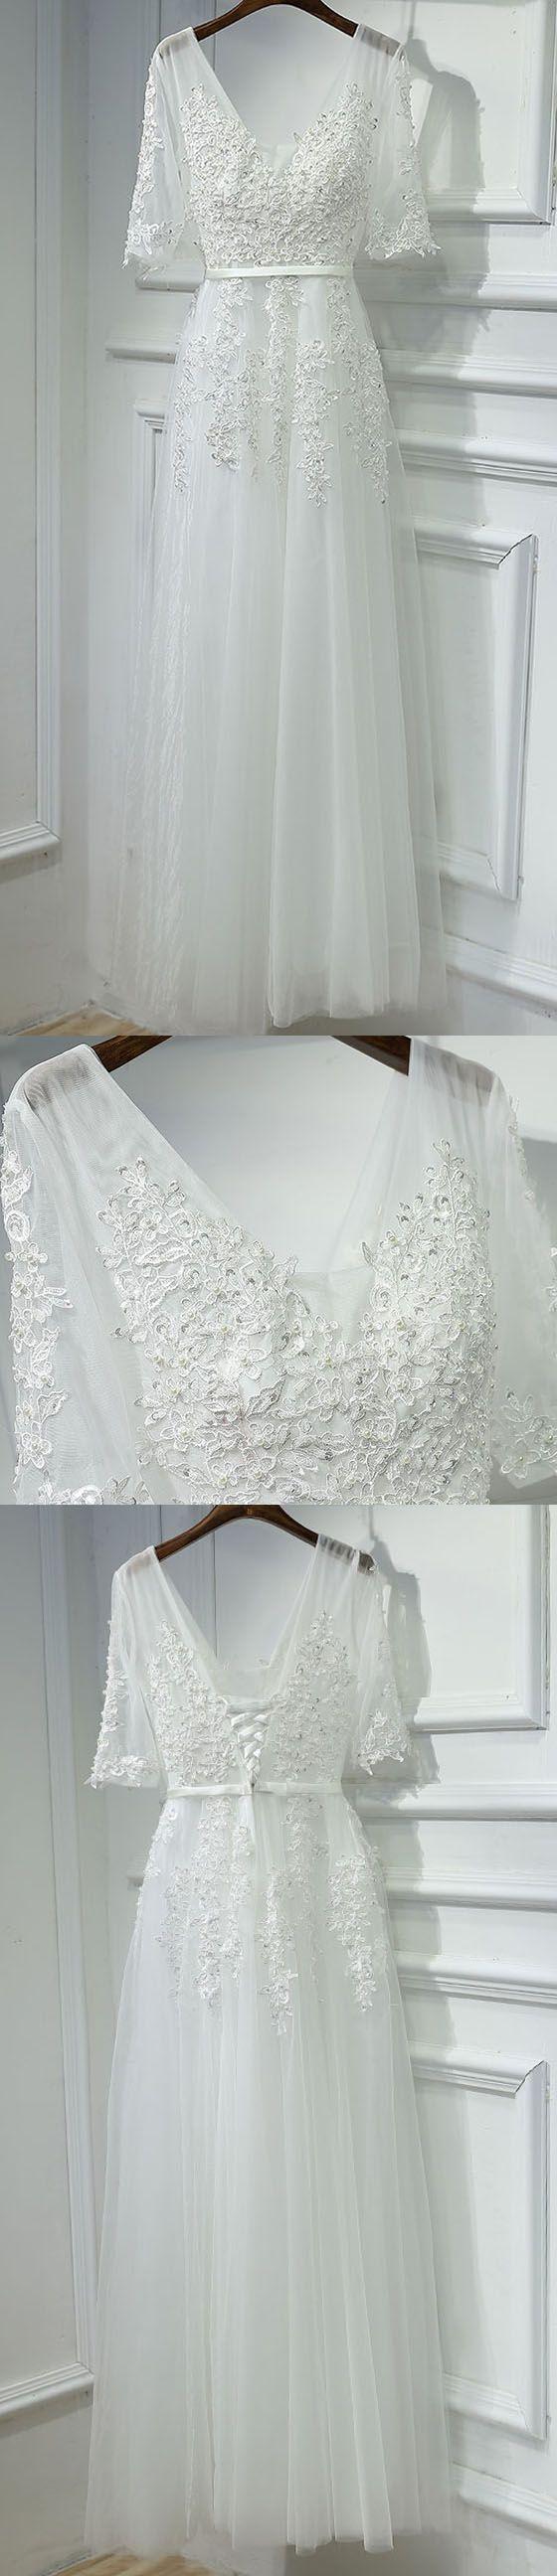 Mariage - Off White Half Sleeves Tulle Applique Lace Up Back V Neck Long Prom Dresses, BGP005 - US0 / Picture Color